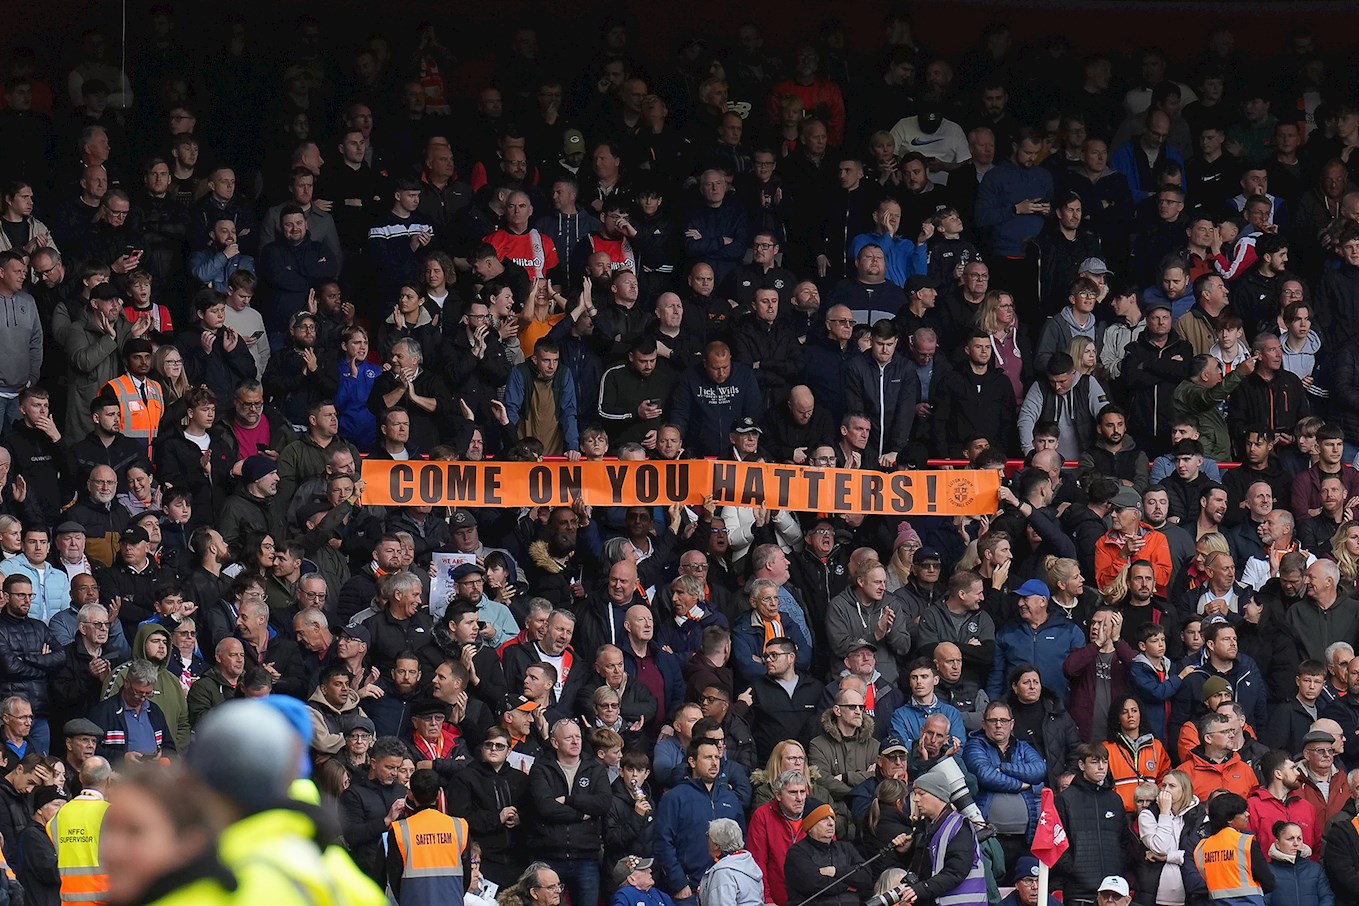 Luton Town fans at Nottingham Forest holding up a banner.